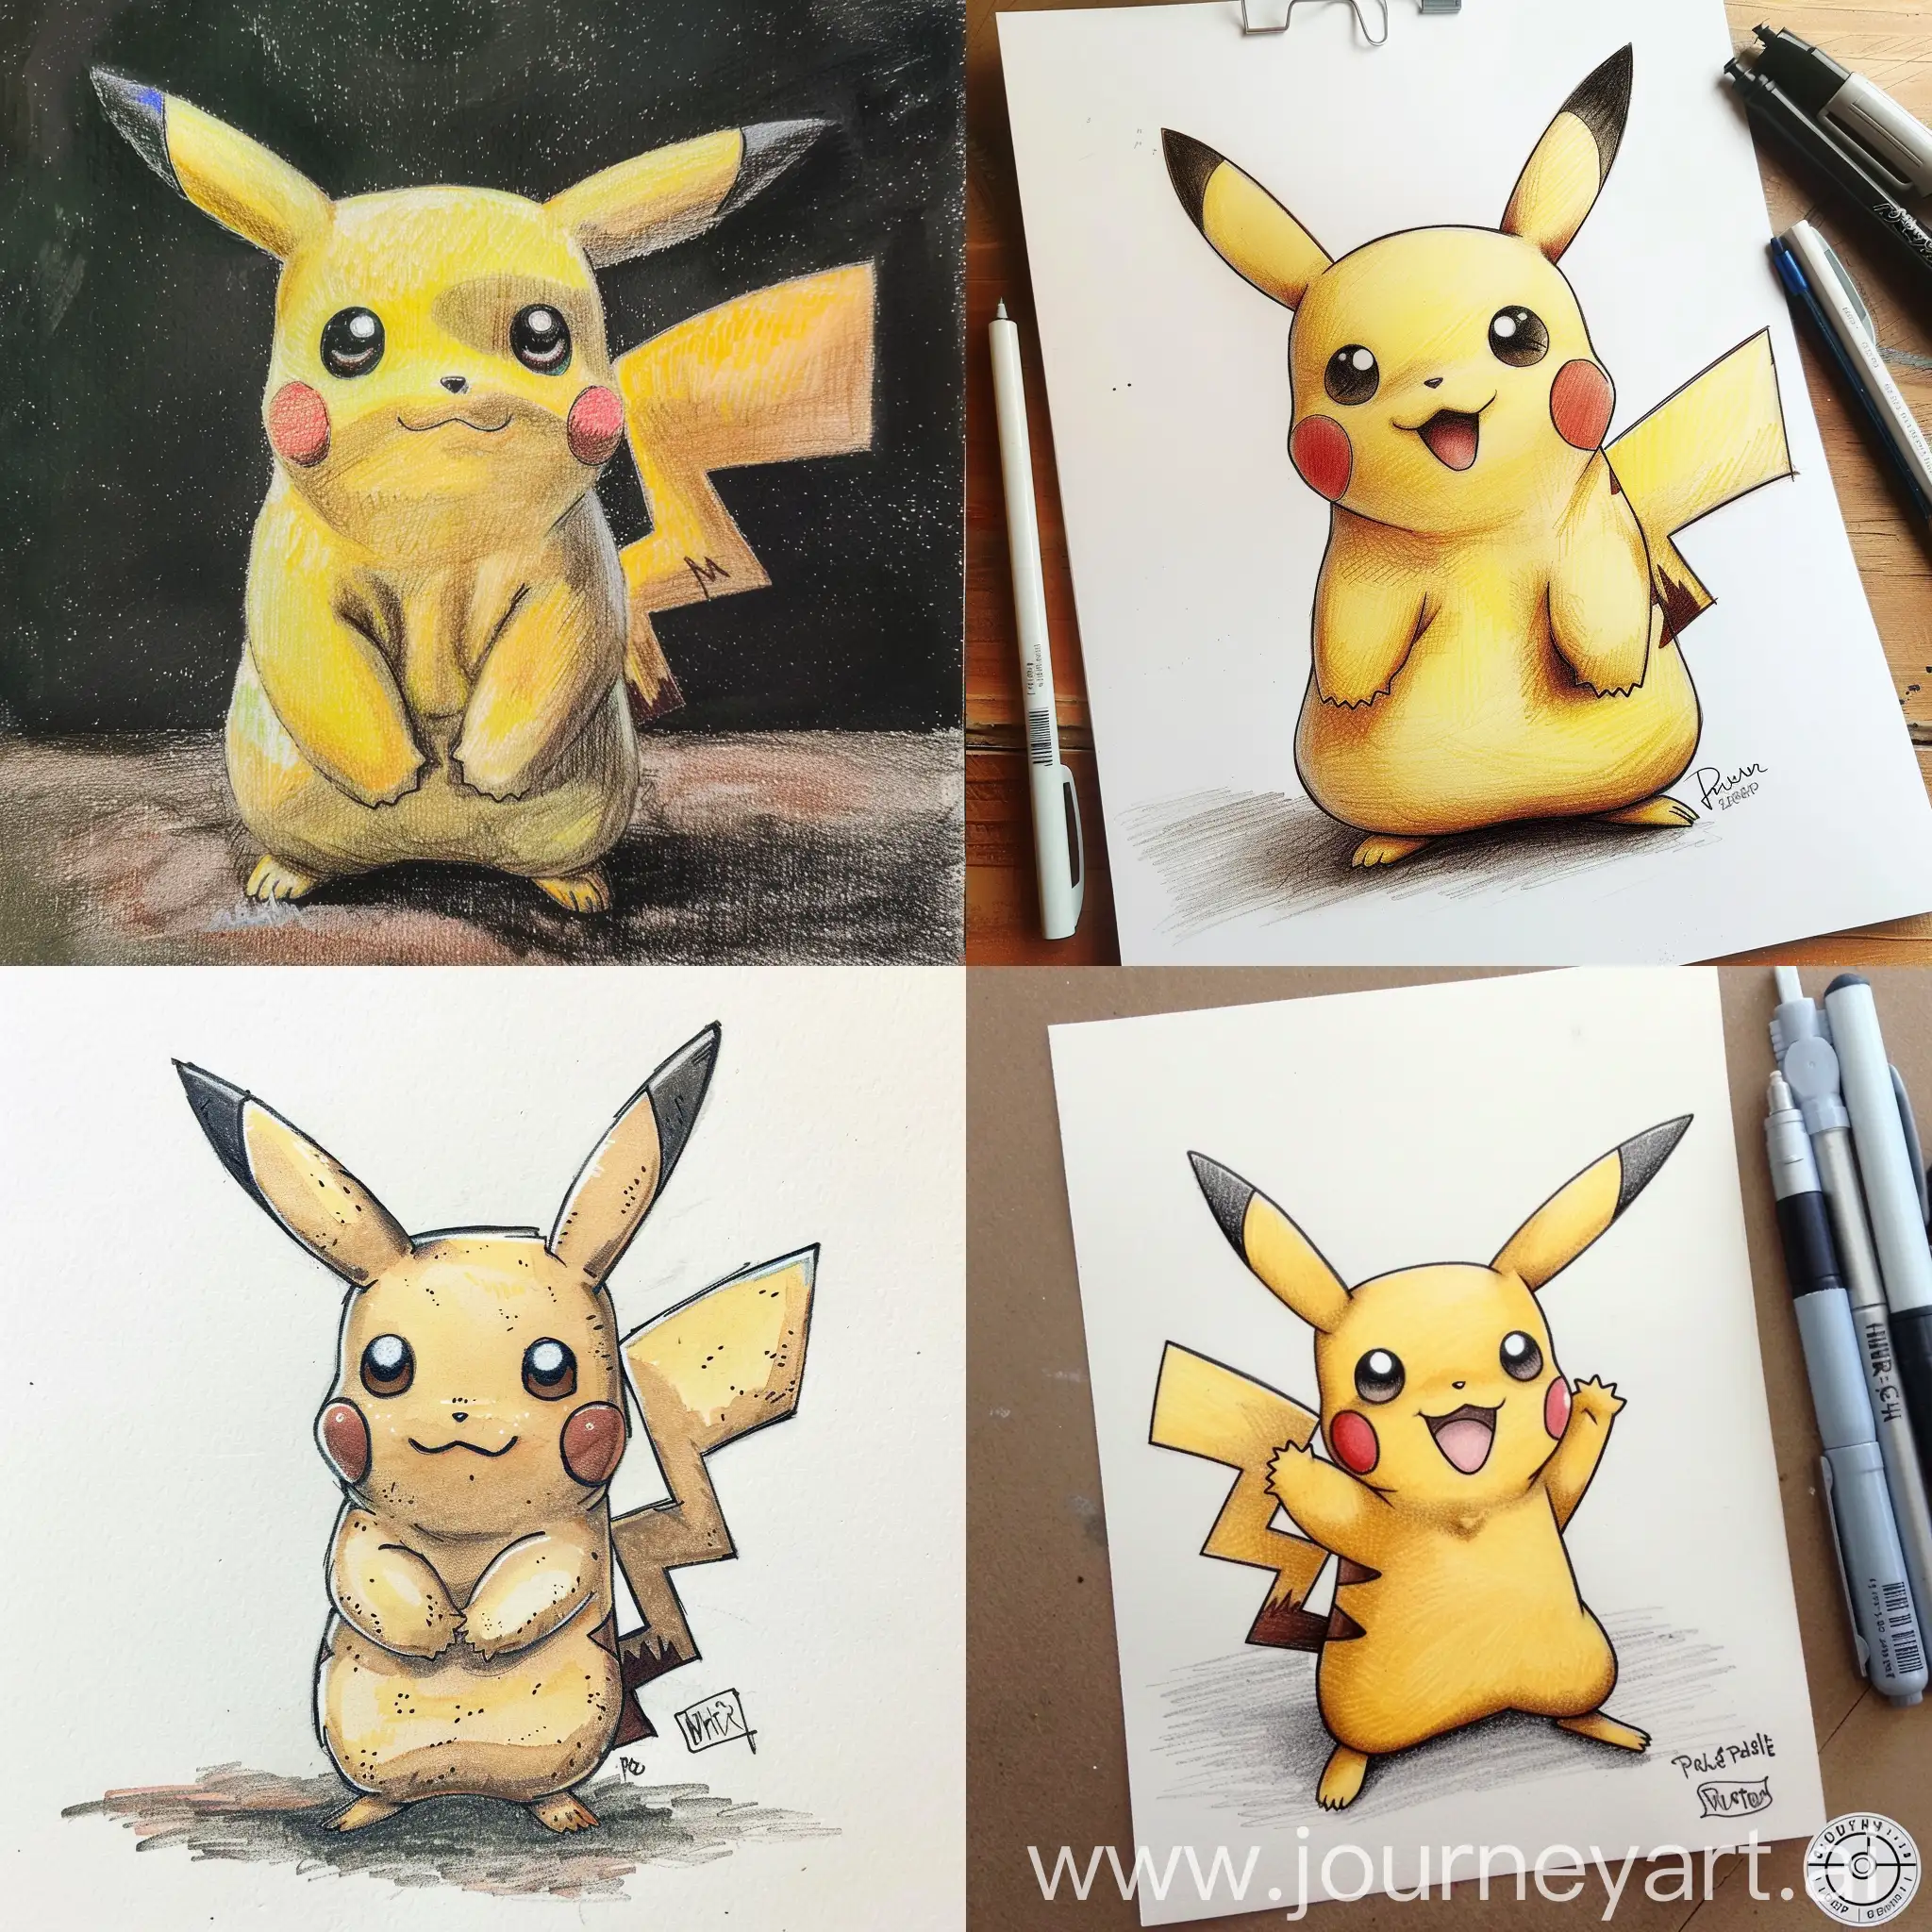 Adorable-Pikachu-Drawing-with-Vibrant-Colors